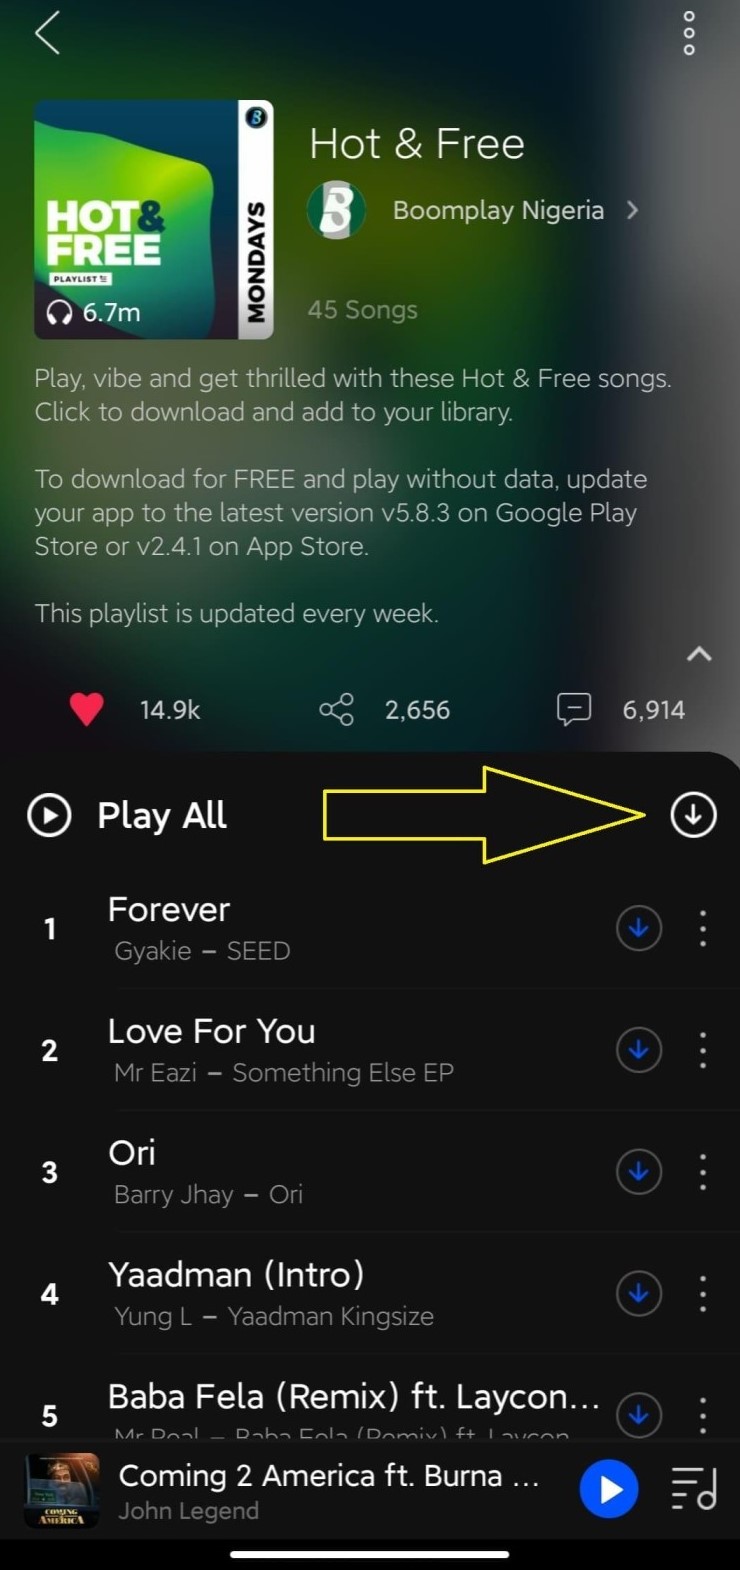 Super 'Bulk Download' is available on Boomplay